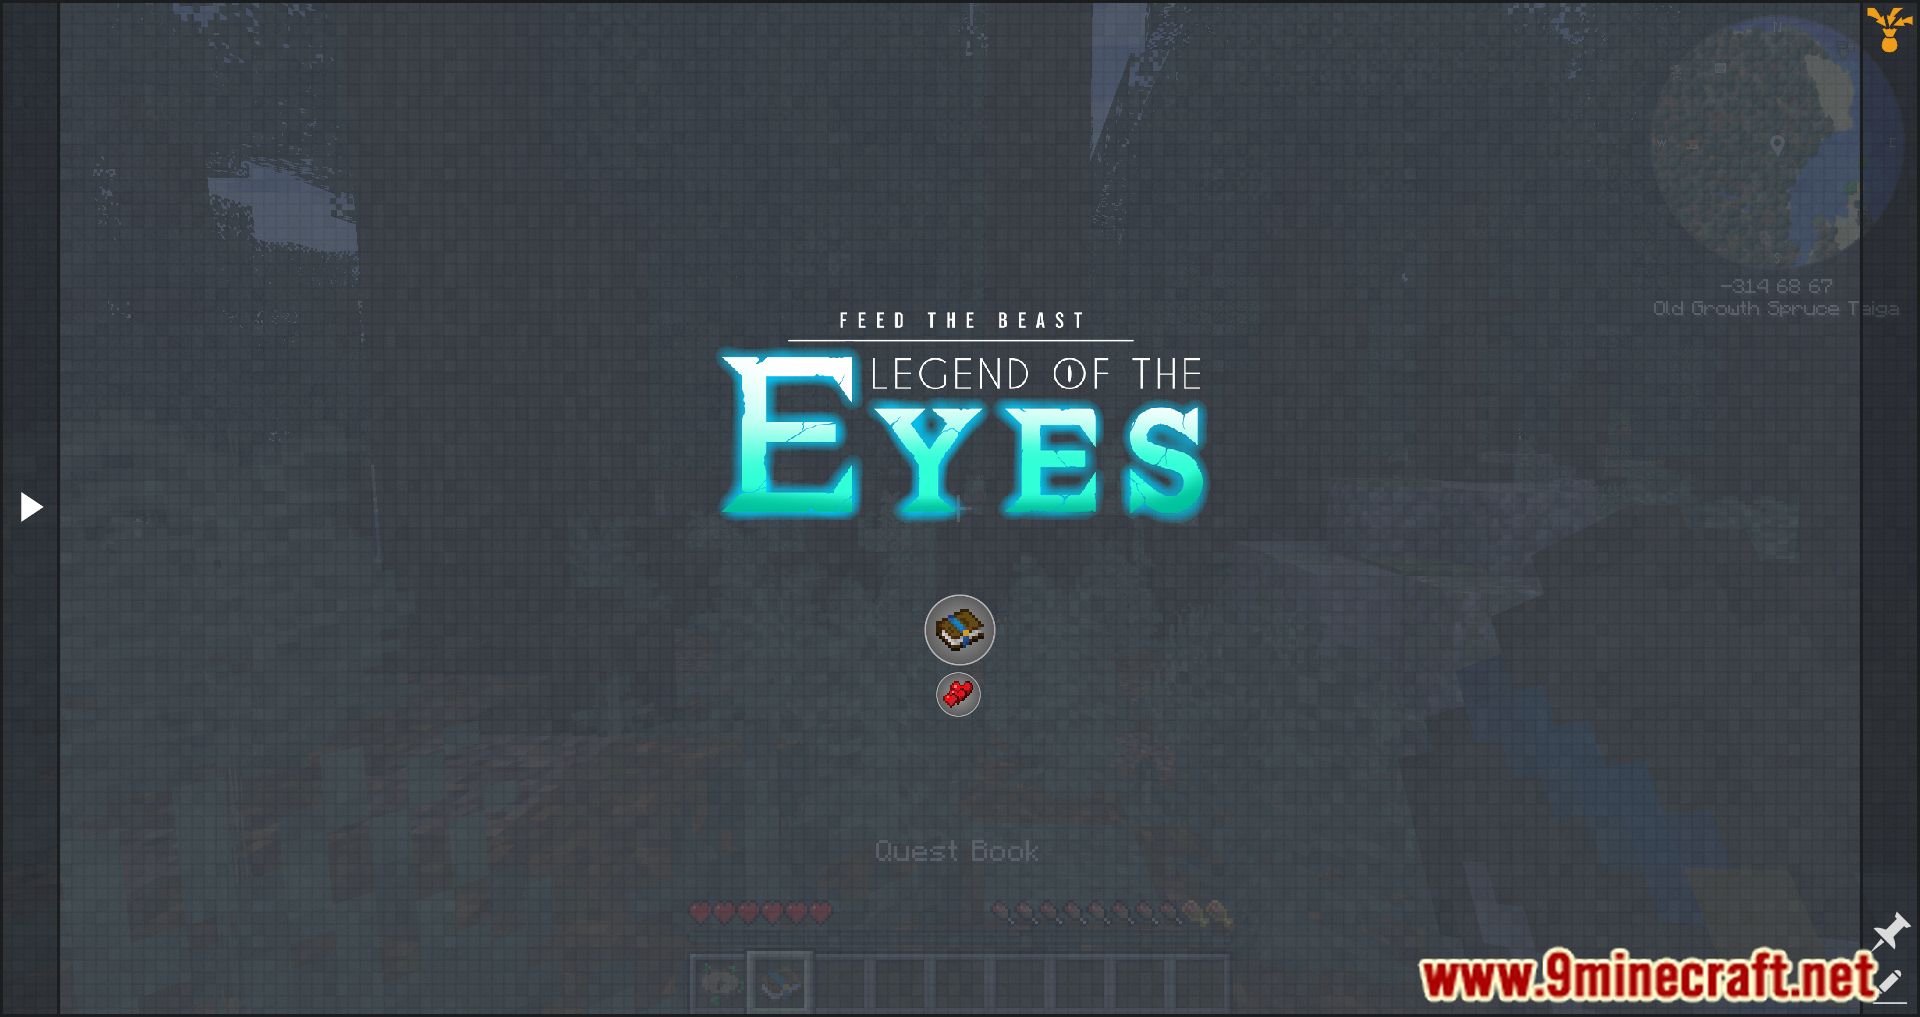 FTB Legend of the Eyes Modpack (1.19.2) - Exploration, Adventure, And Danger! 9